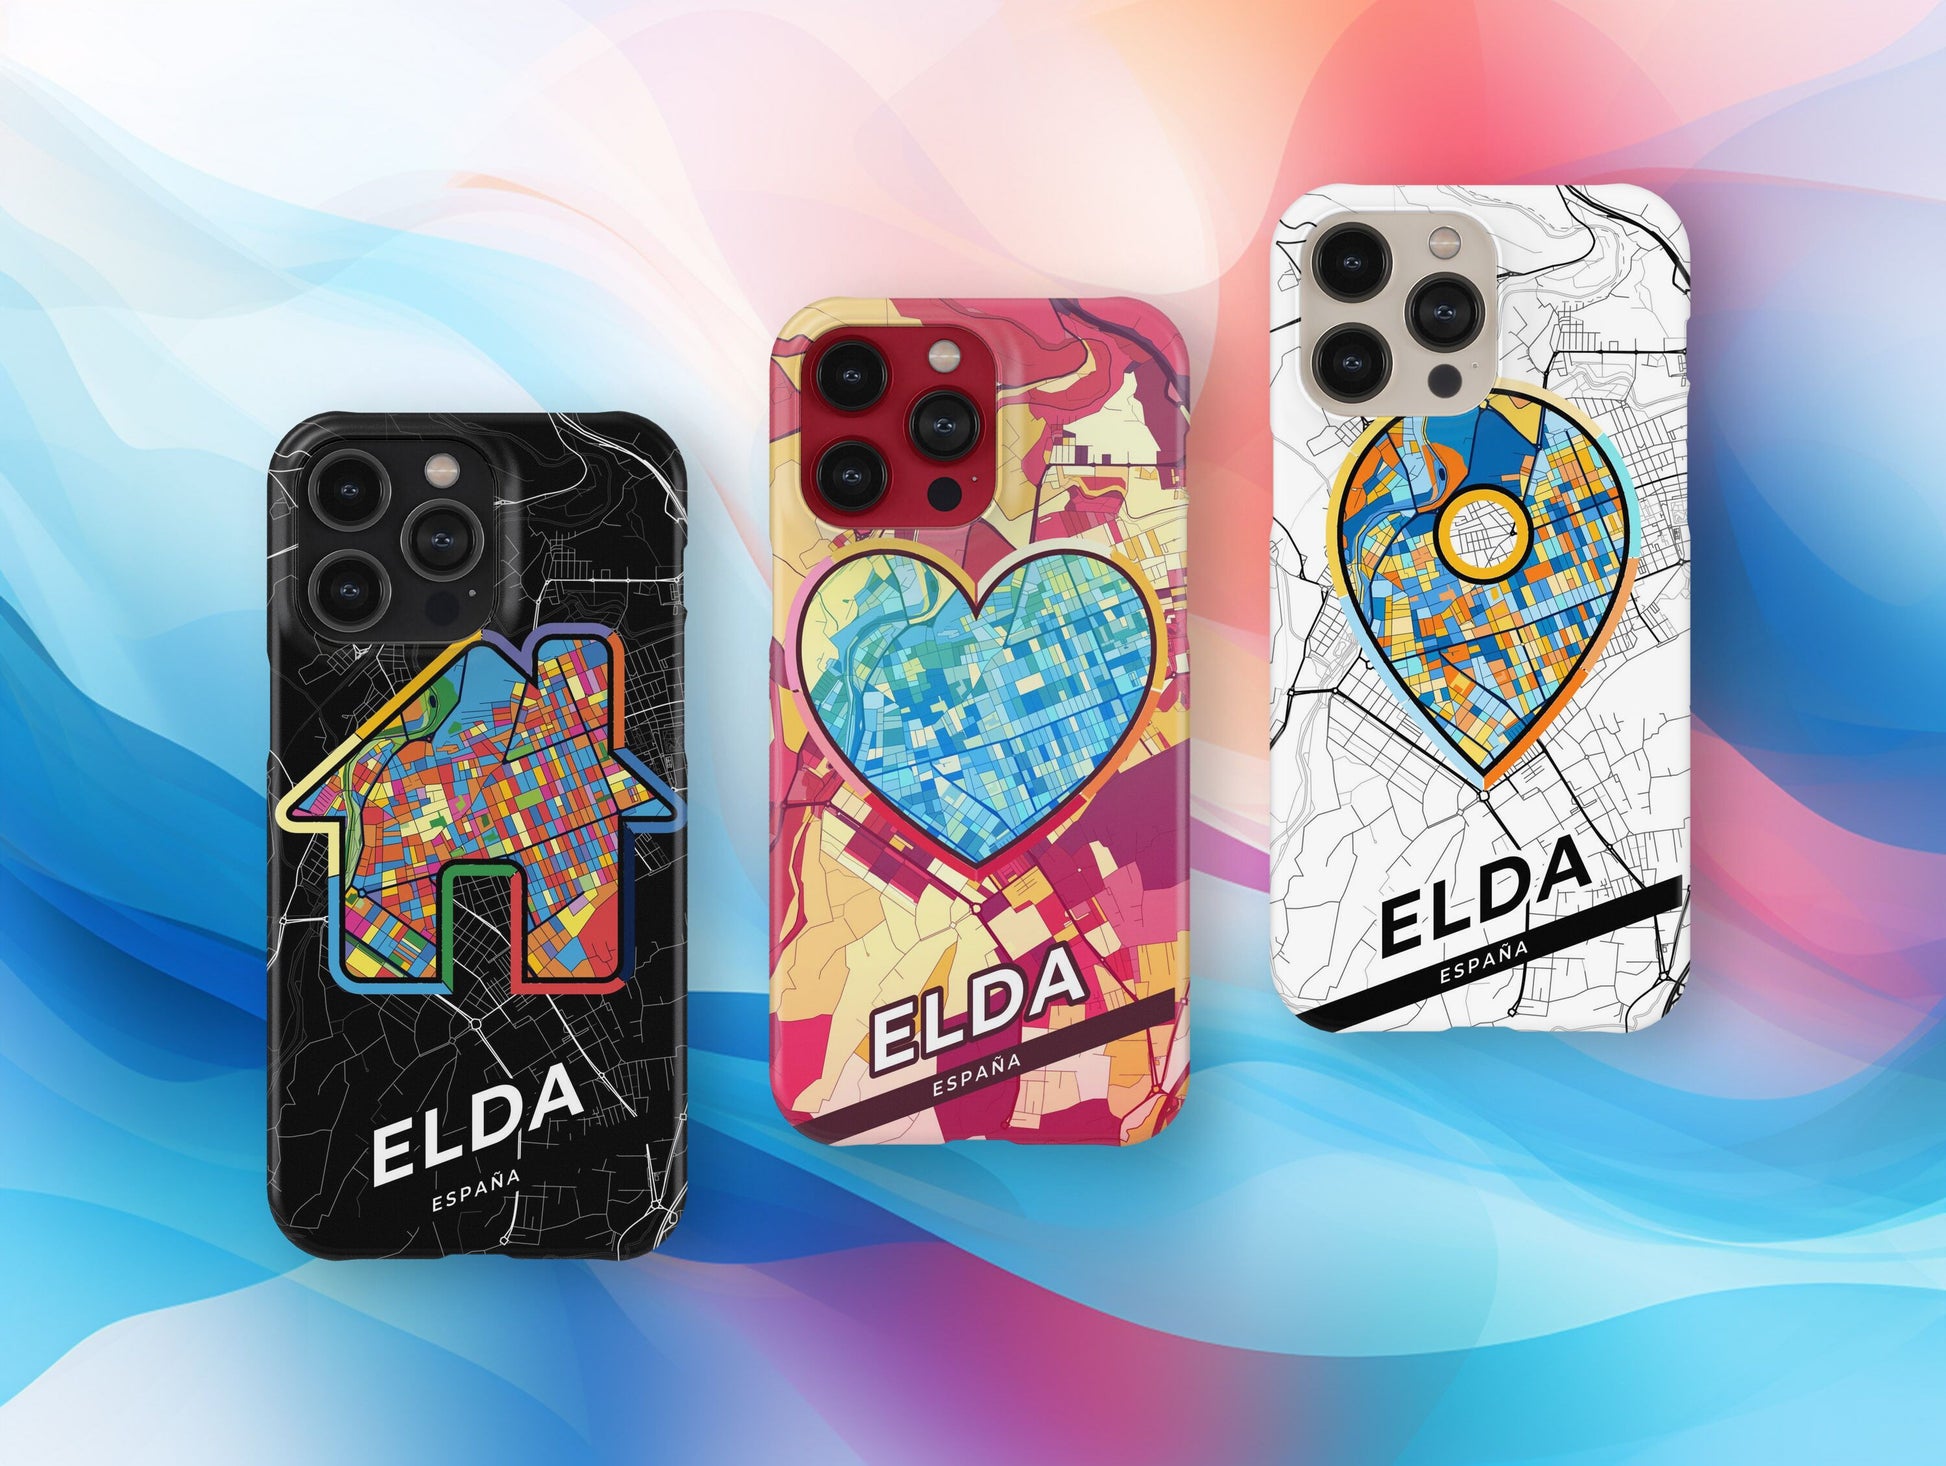 Elda Spain slim phone case with colorful icon. Birthday, wedding or housewarming gift. Couple match cases.